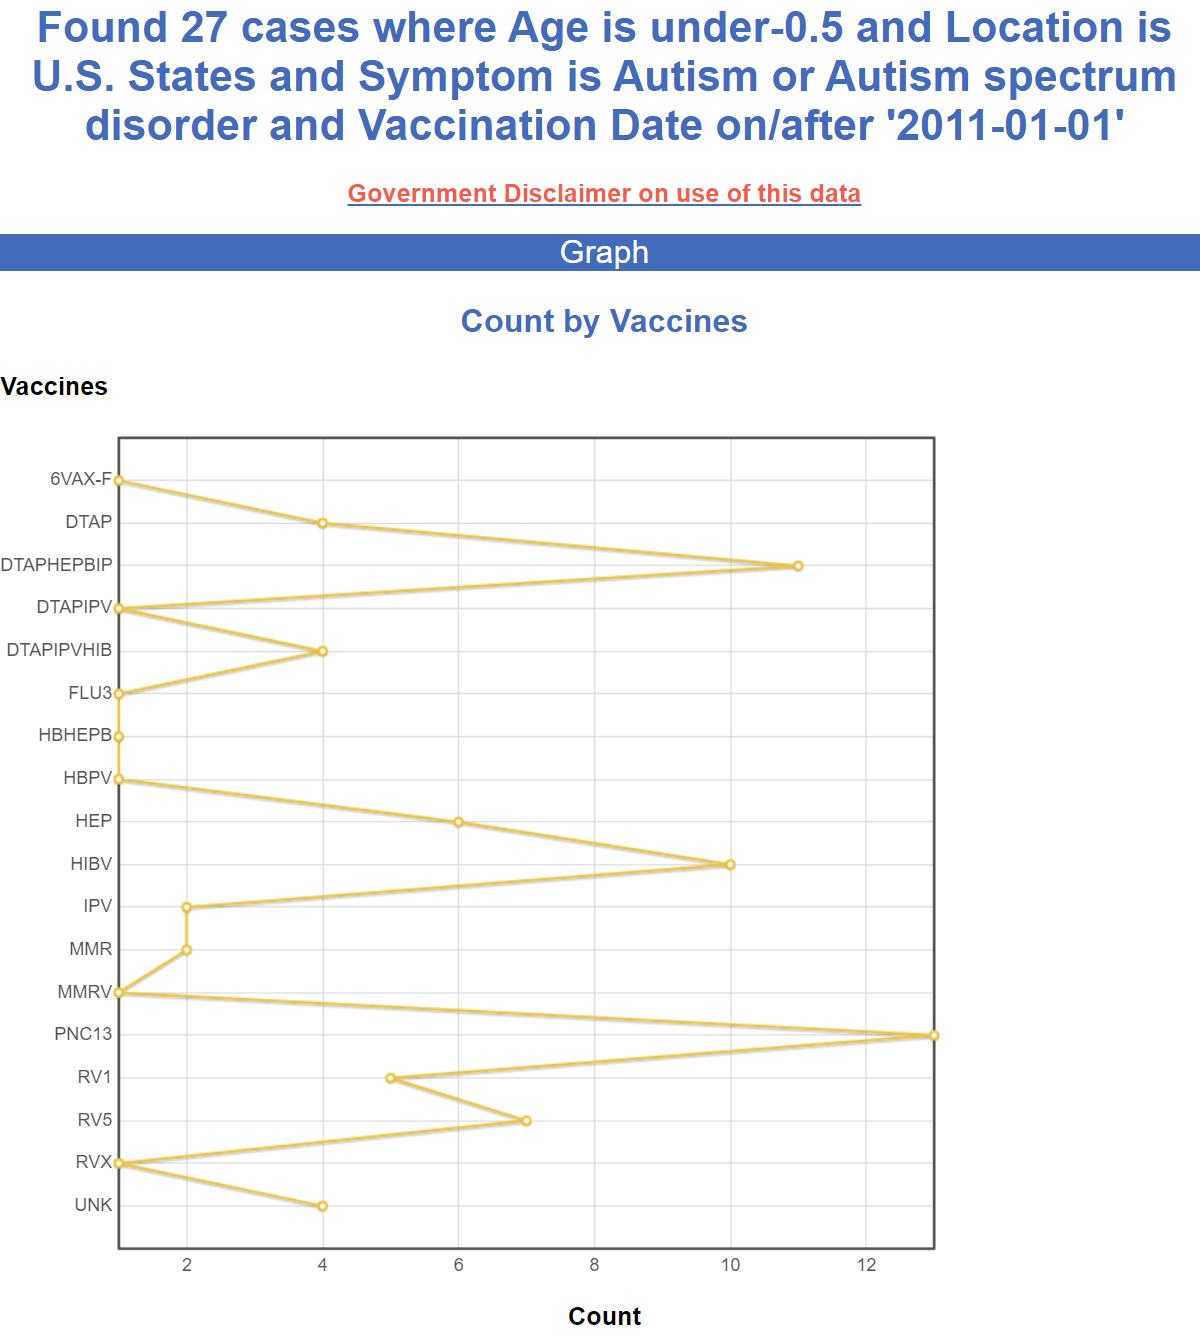 VAERS data shows that vaccines cause autism Https%3A%2F%2Fsubstack-post-media.s3.amazonaws.com%2Fpublic%2Fimages%2Fe3d147b7-74d8-49b9-ae43-7725ffd60957_1200x1344